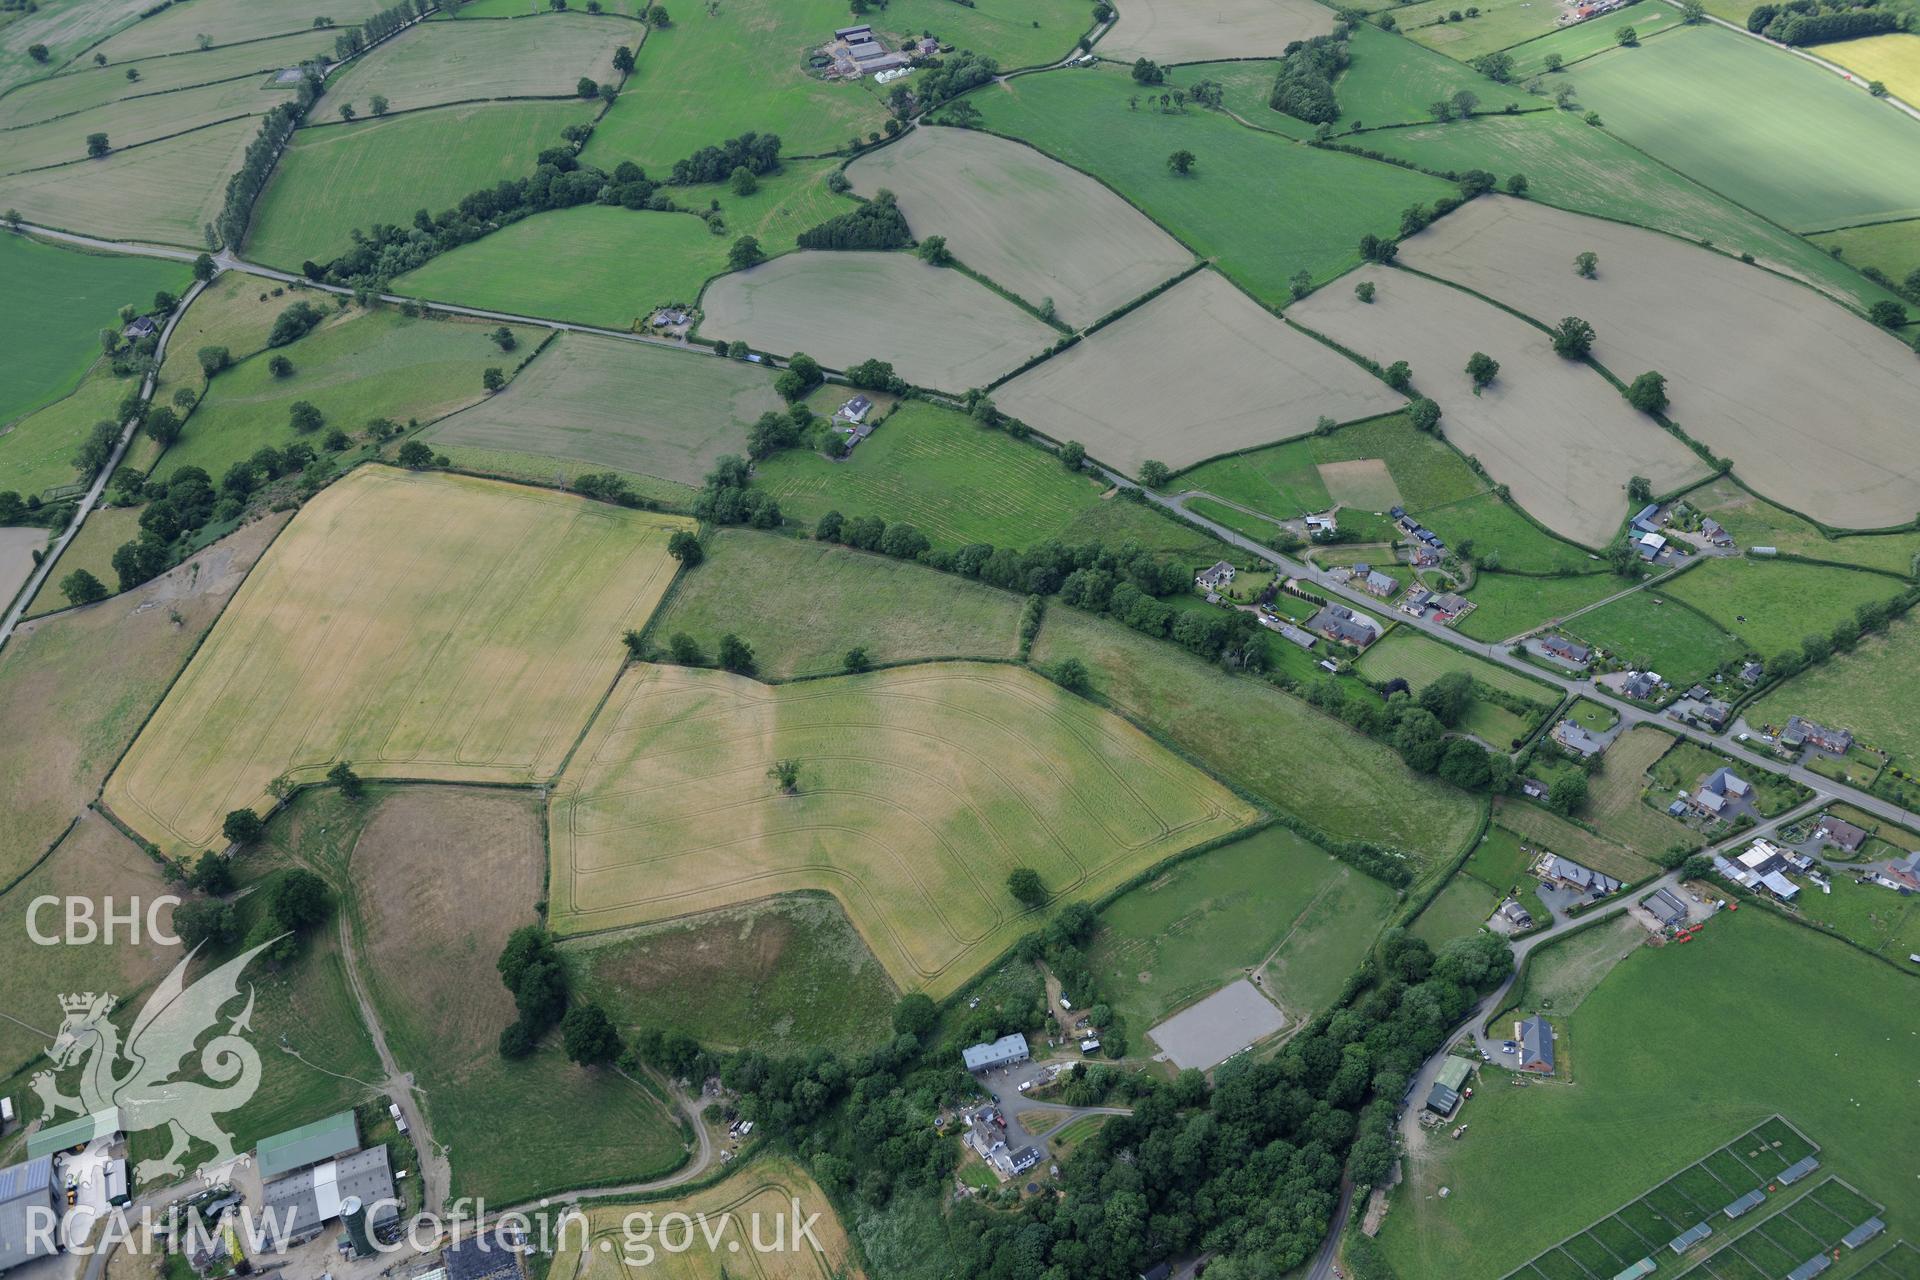 Section of Offa's Dyke from Cwm by-road to Hem road, north of Montgomery. Oblique aerial photograph taken during the Royal Commission's programme of archaeological aerial reconnaissance by Toby Driver on 30th June 2015.